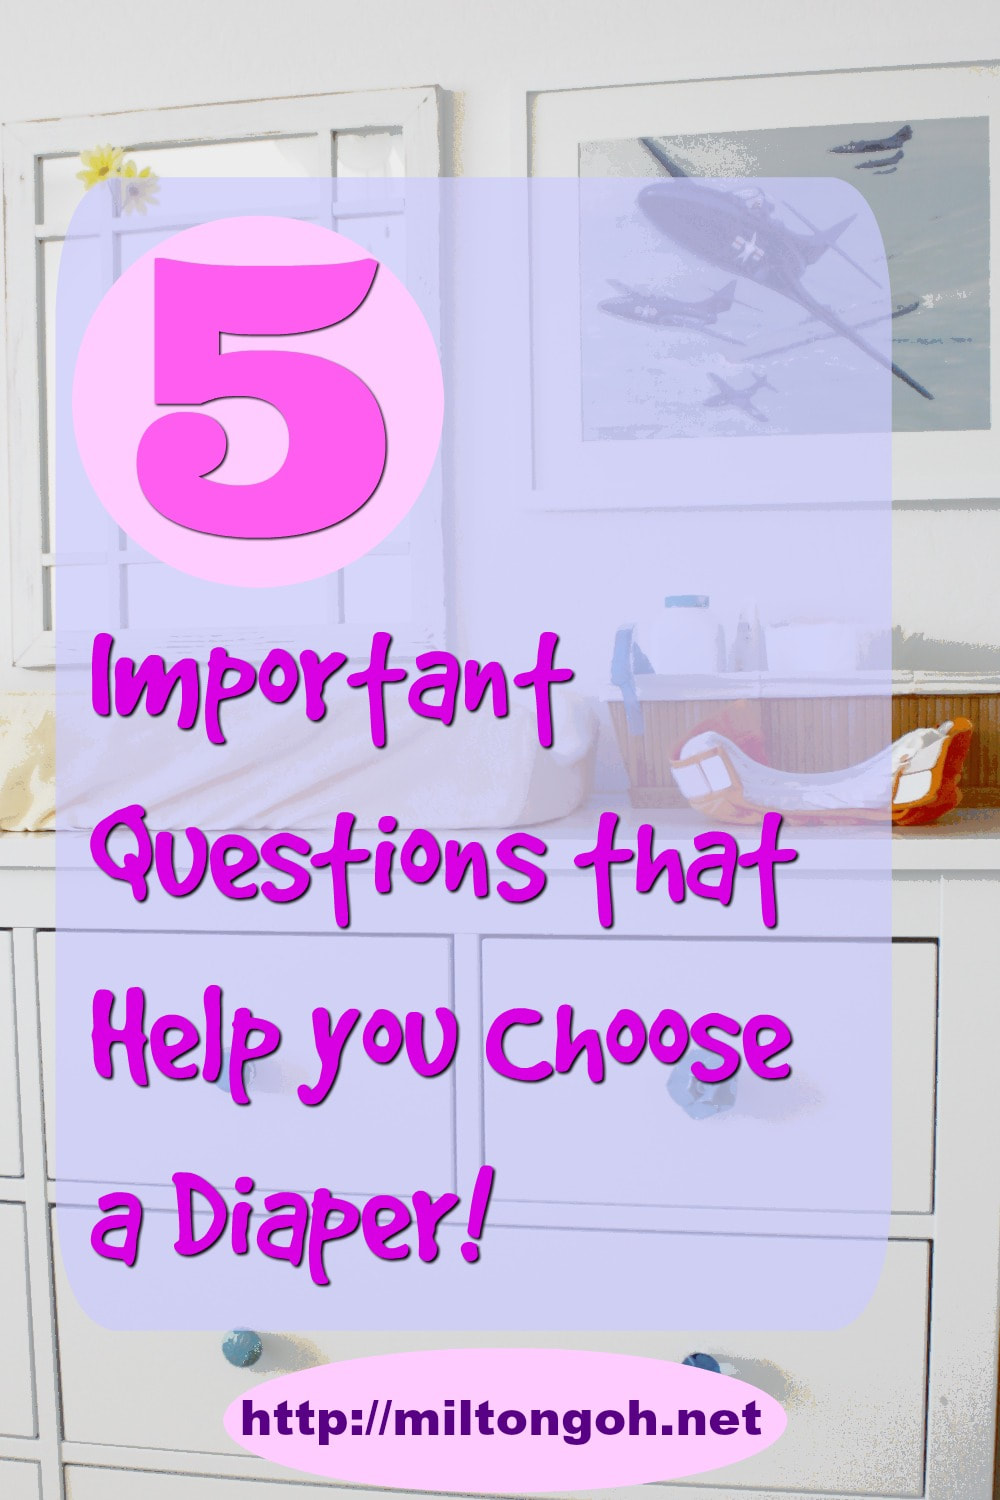 You are reading: 5 Important Questions to Ask When Choosing a Diaper for your Little One and Why We Prefer Huggies Platinum Pants! ​